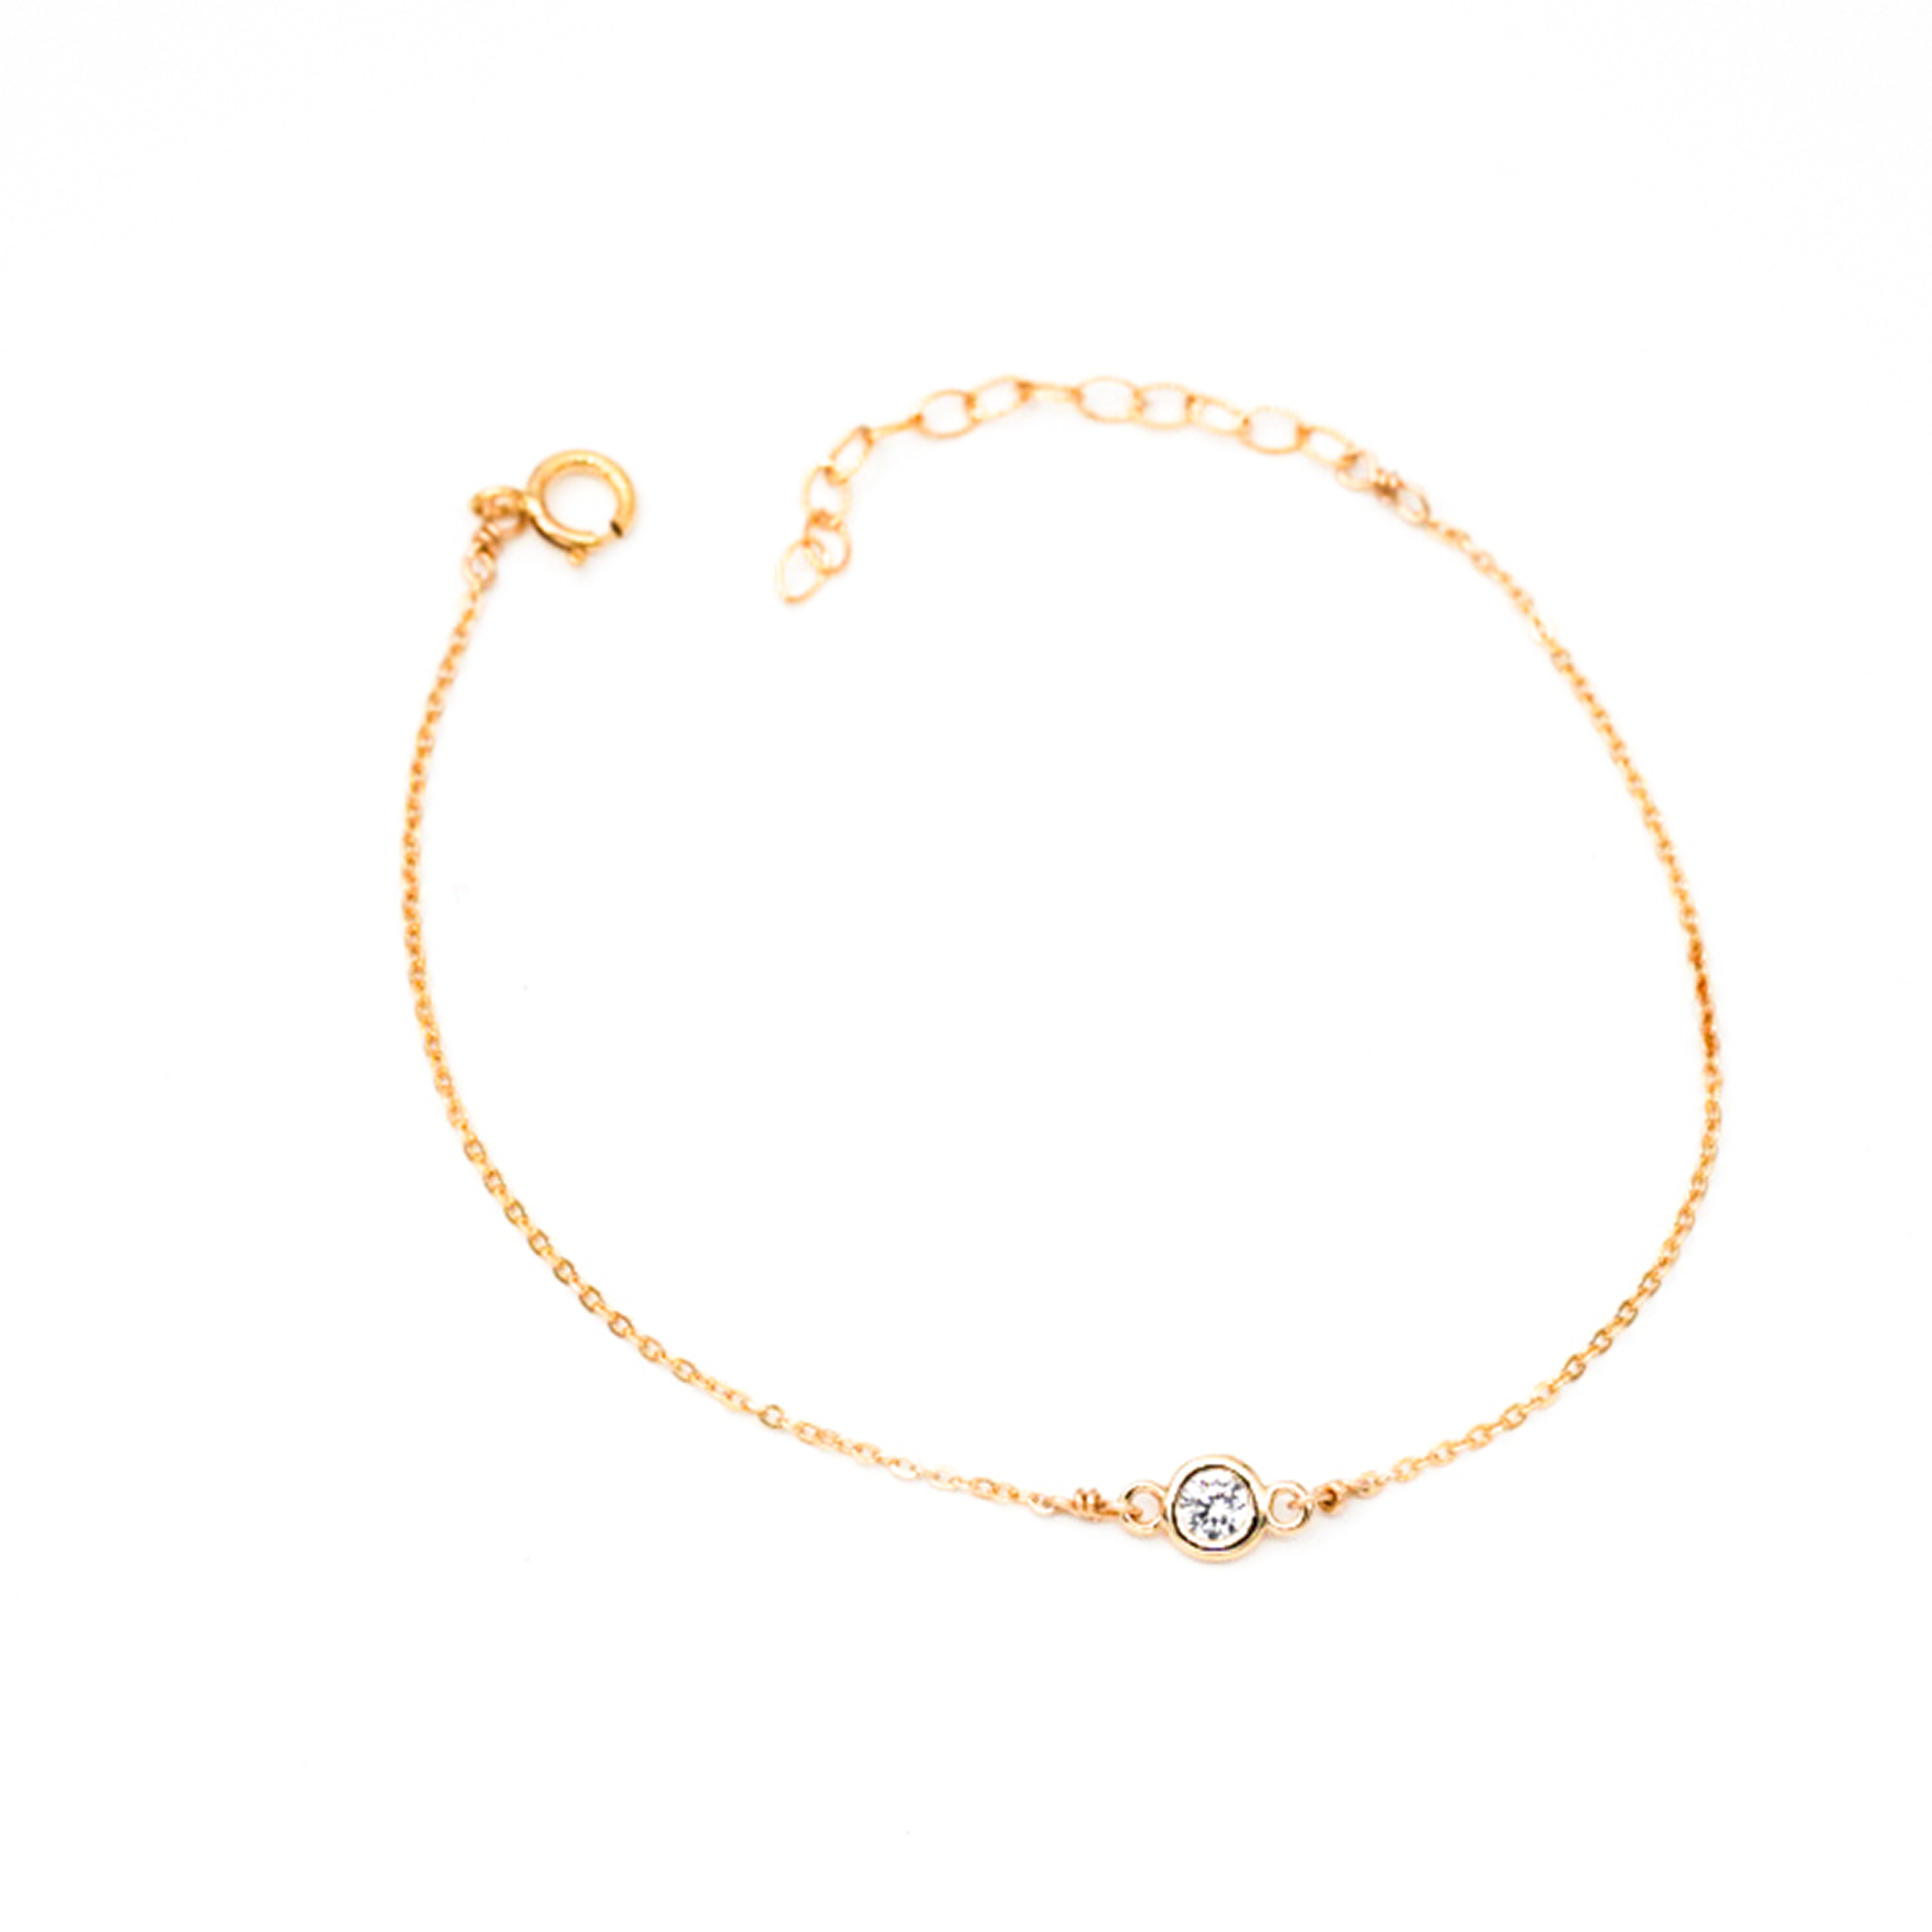 Dainty gold chain with small circular diamond in center.